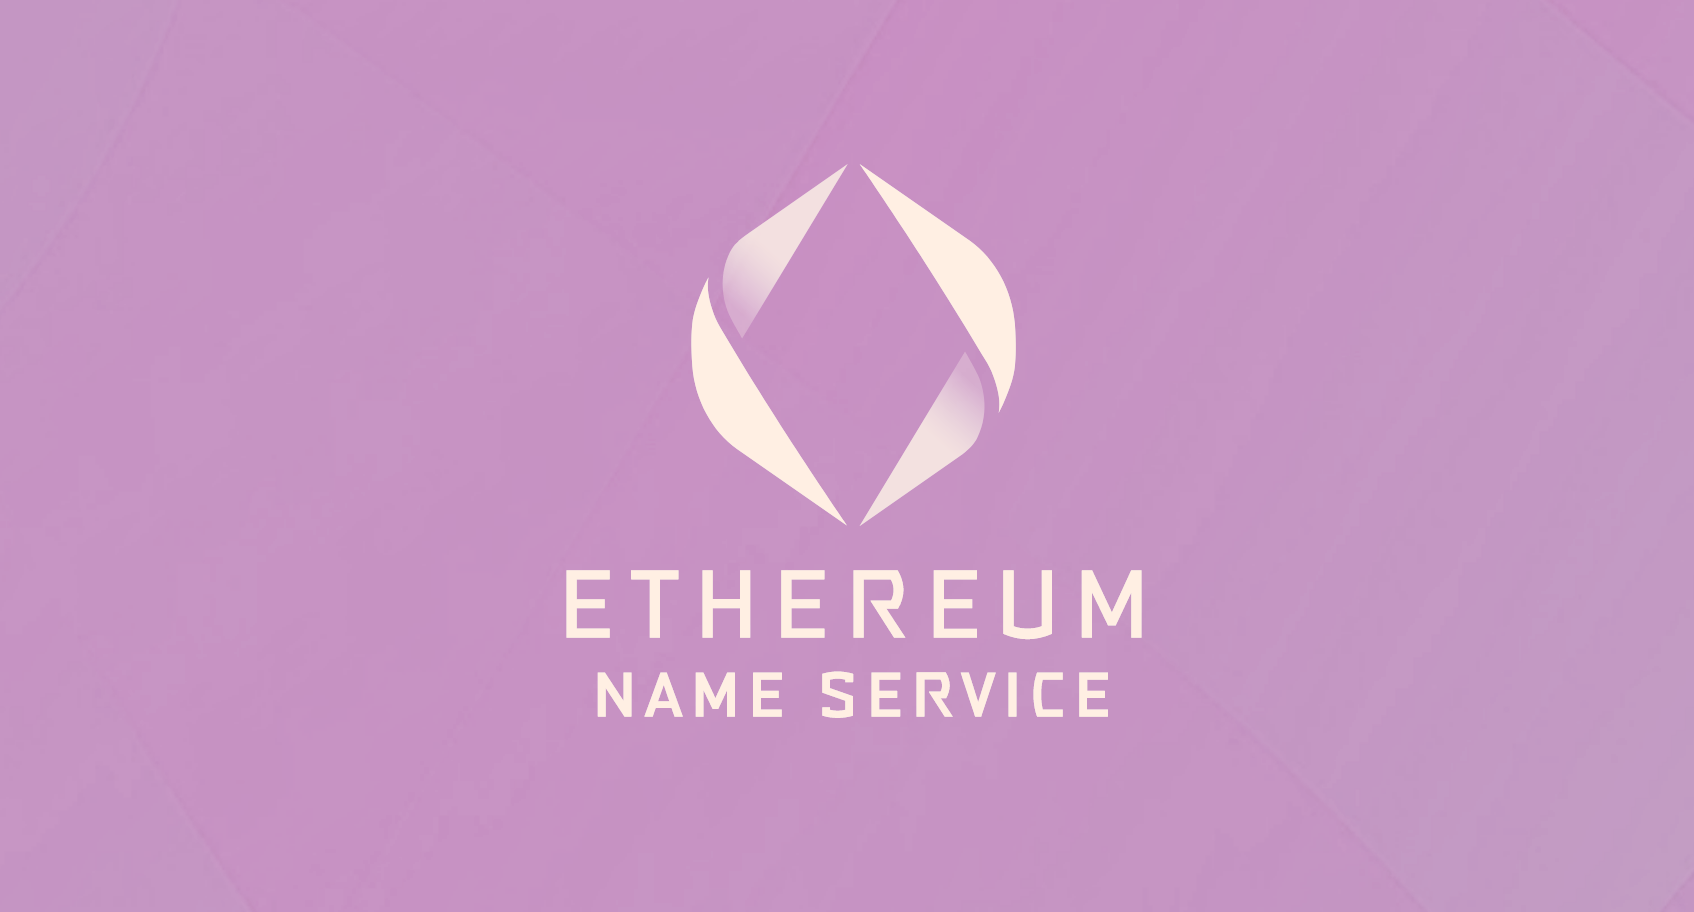 The Ethereum Name Service wants to make Ethereum easier to use. But there's a catch. Image: Ethereum Name Service.